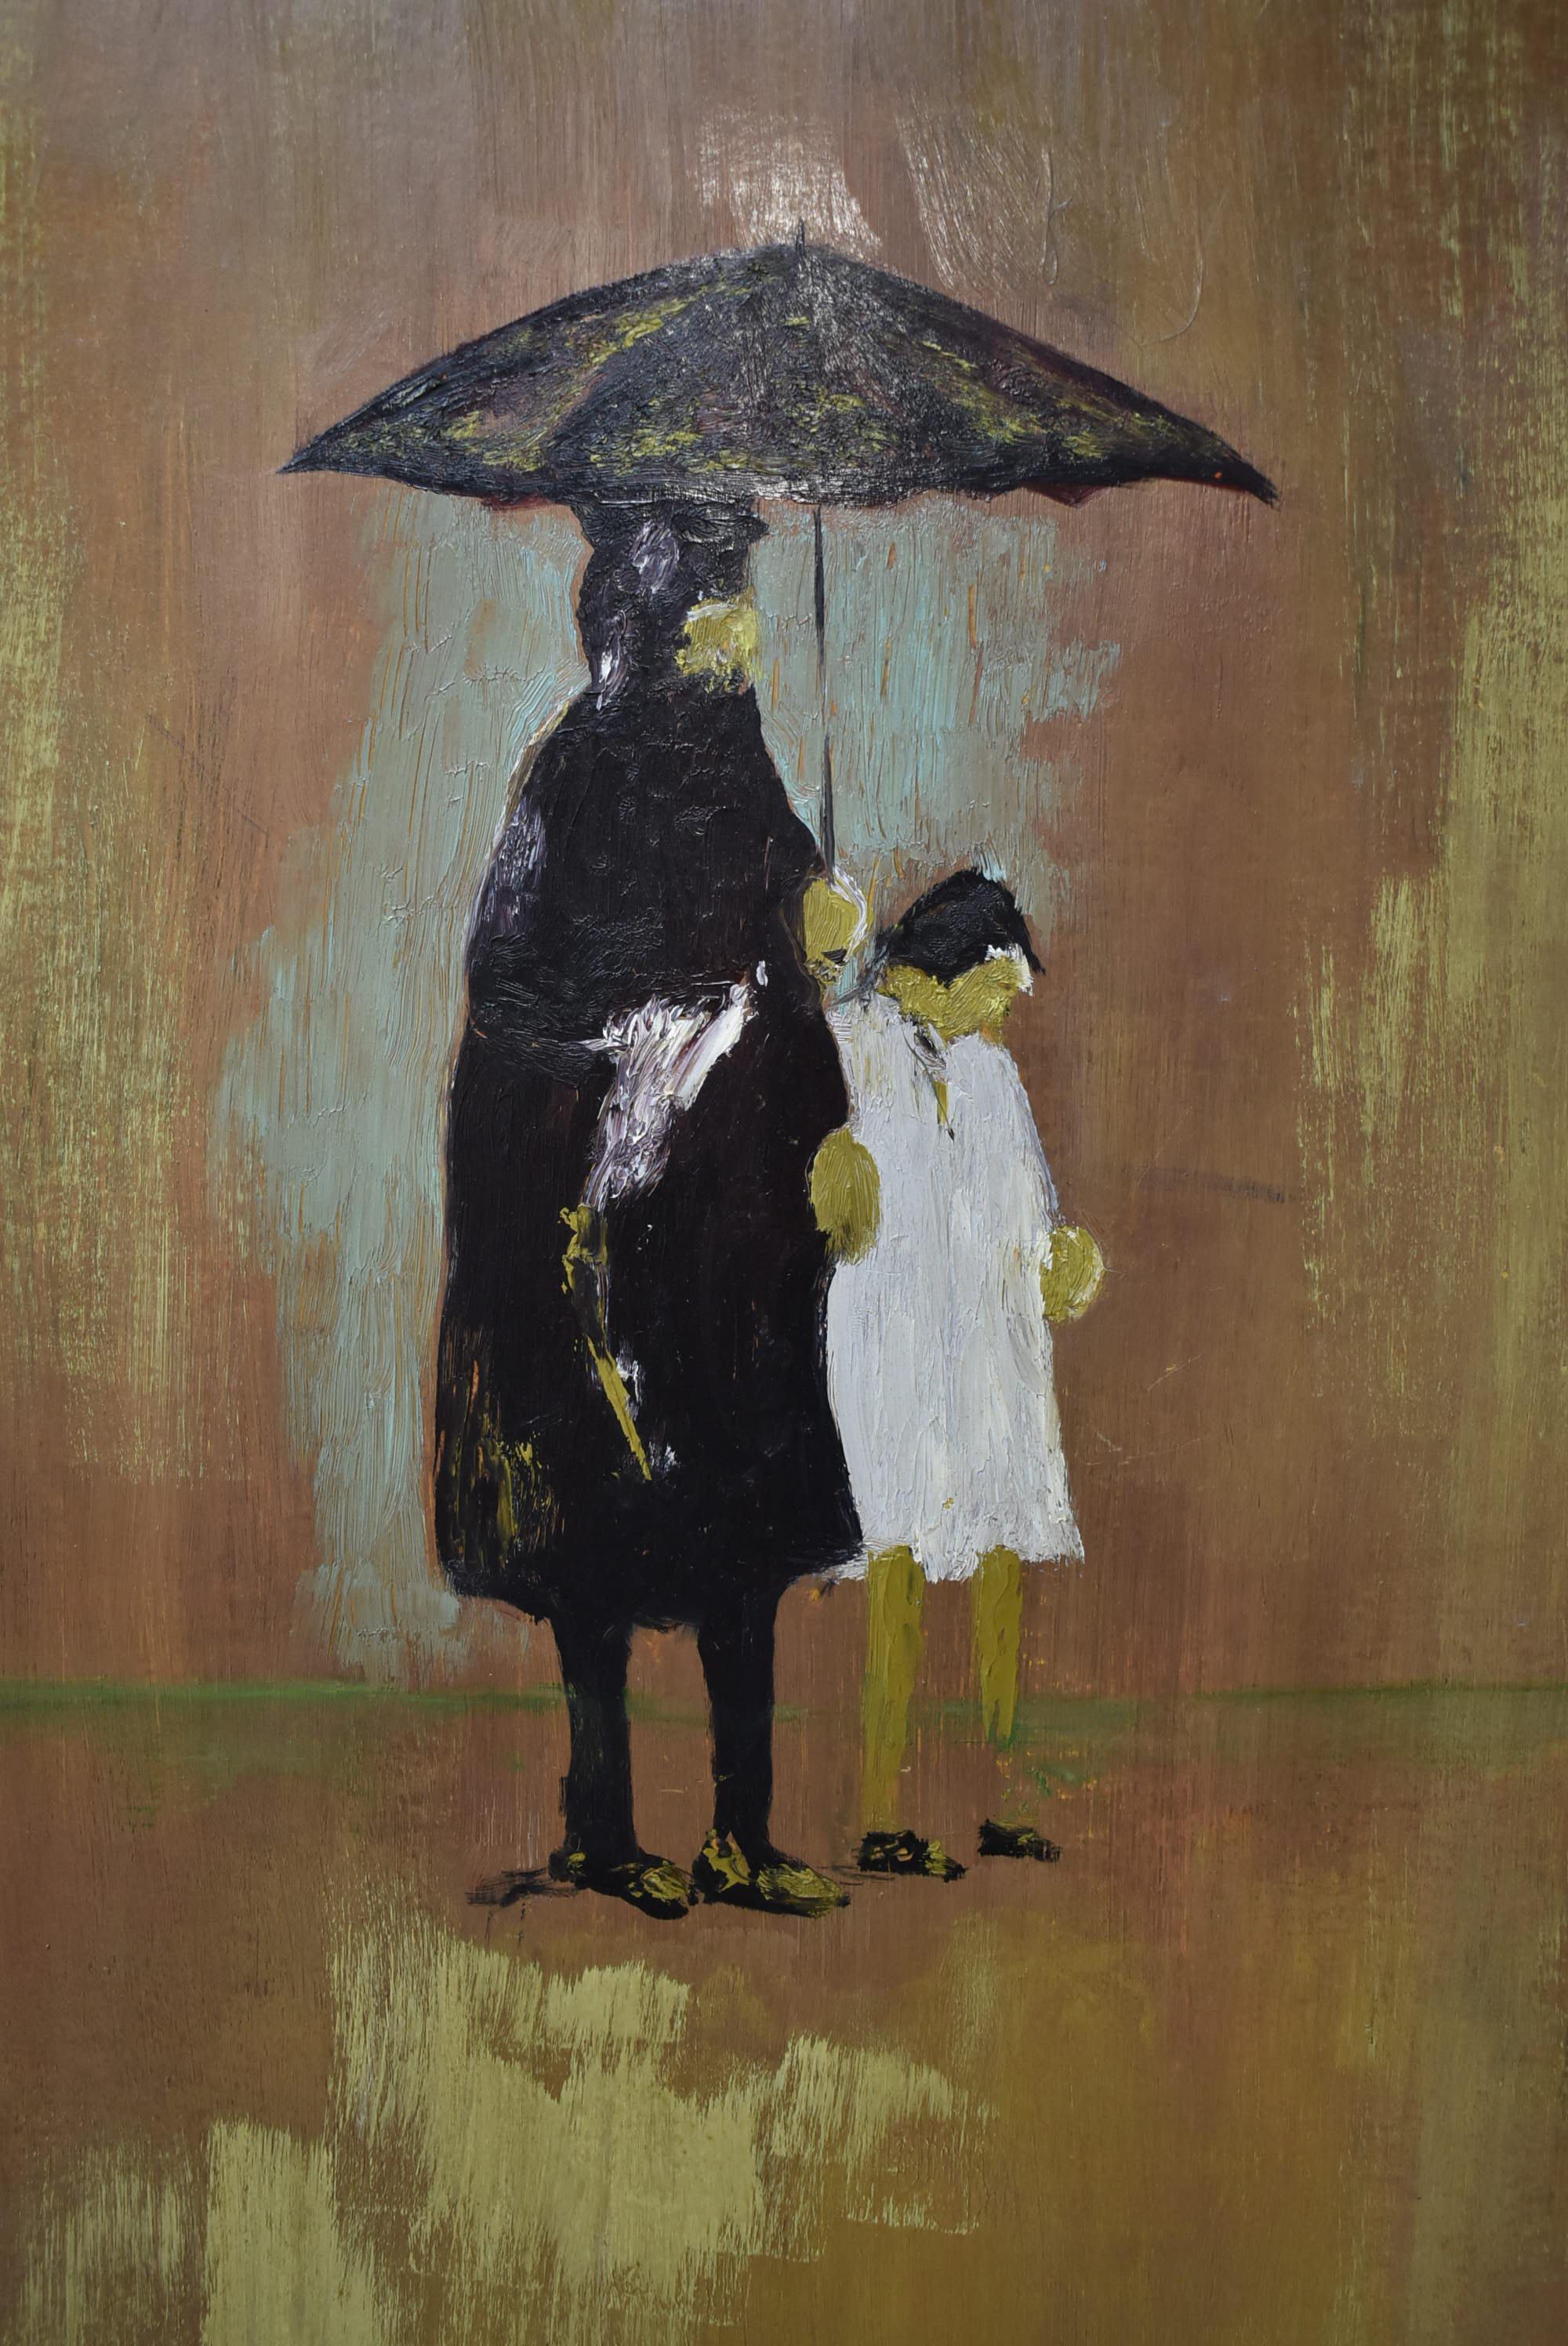 P. Zazzetta impressionistic oil of a lady with child under umbrella. New custom frame in tones of bronze, gold, copper and green. Very nice condition. Painting is on board. Image size measures at 18.88